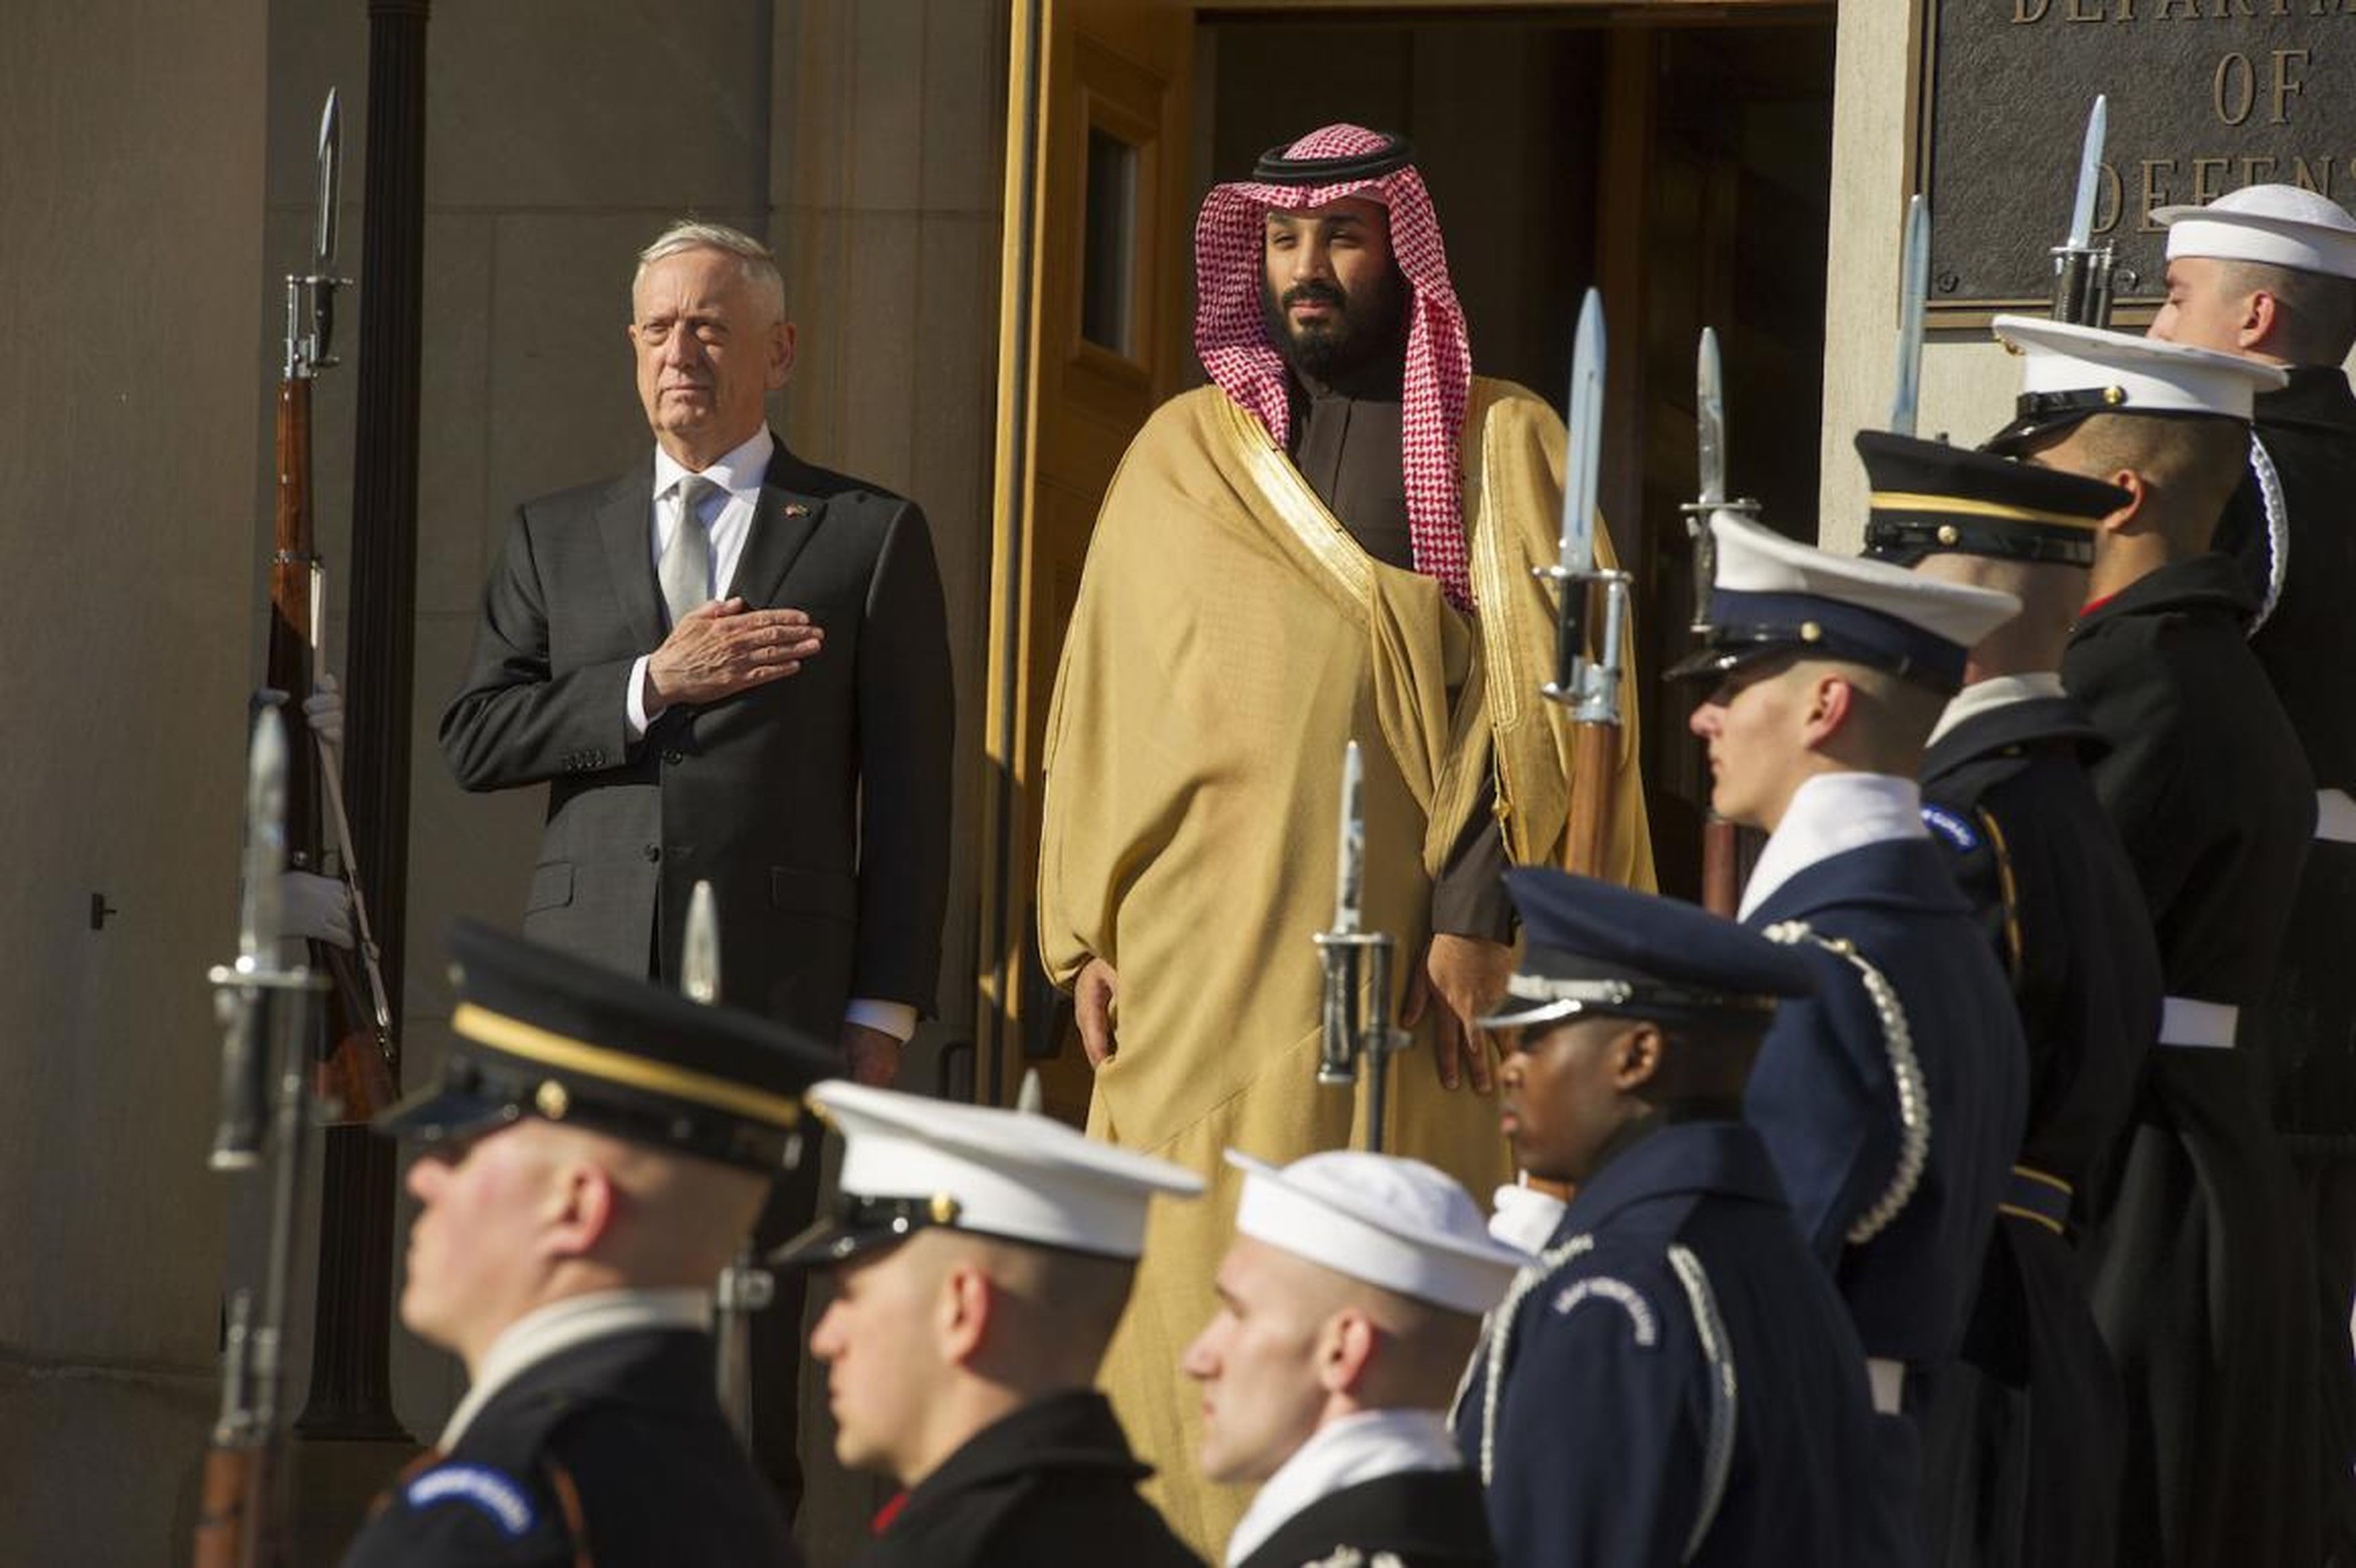 Defense Secretary James Mattis welcoming Prince Mohammed to the Pentagon on March 22.